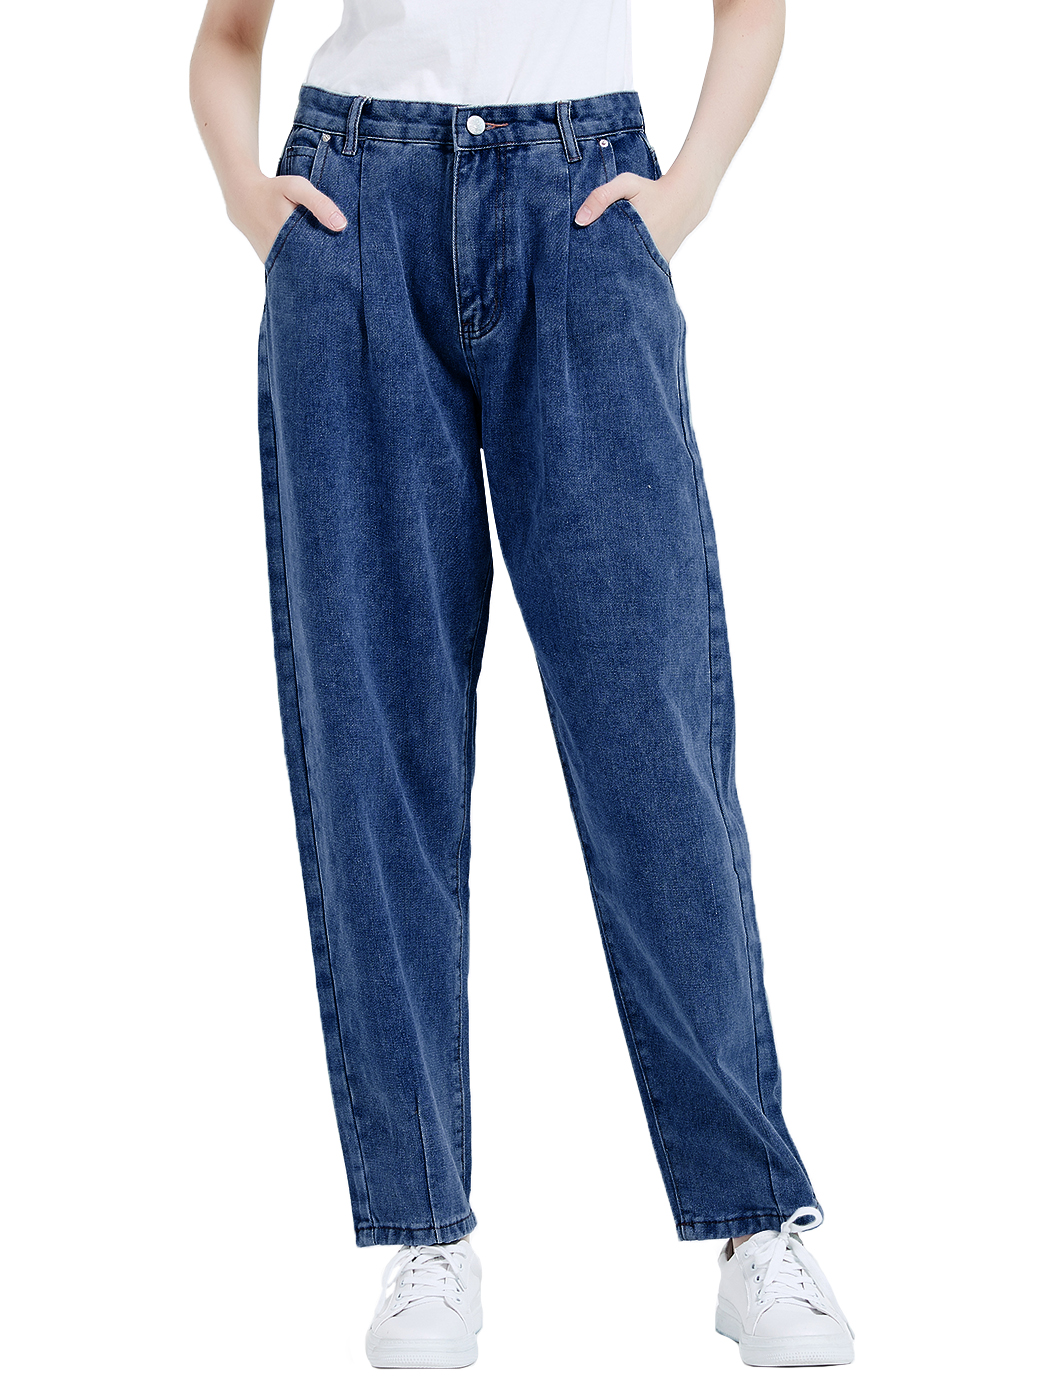 Women's Classic High Waisted Boyfriend Cropped Denim Jeans Loose Harem Pants - image 1 of 7